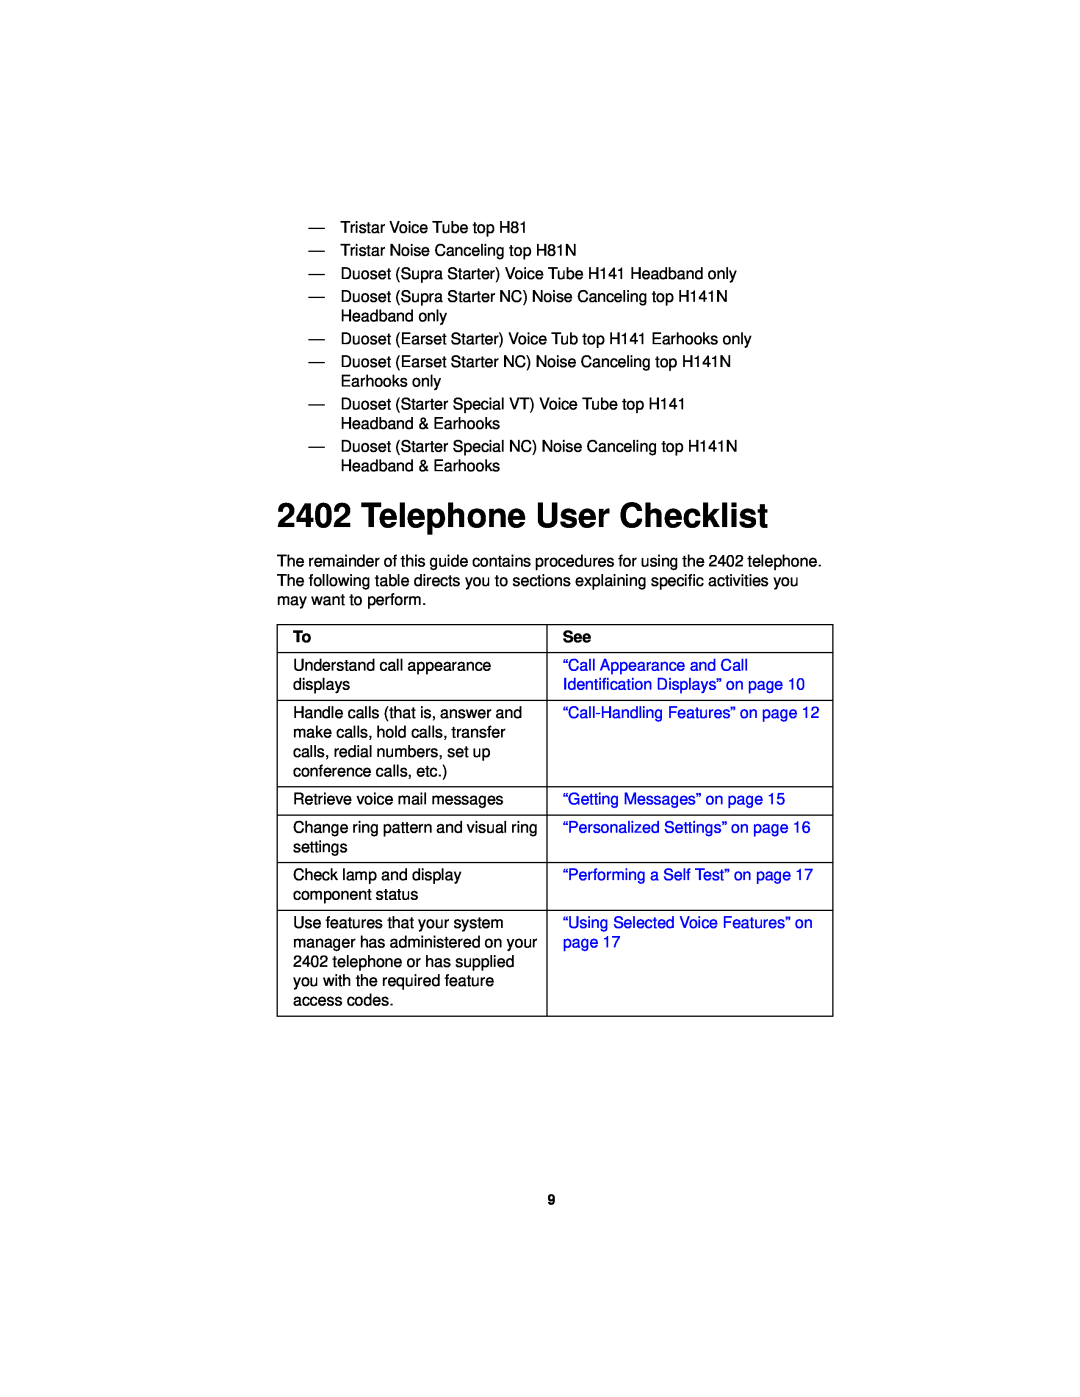 Avaya 2402 manual Telephone User Checklist, “Call Appearance and Call, Identification Displays” on page 